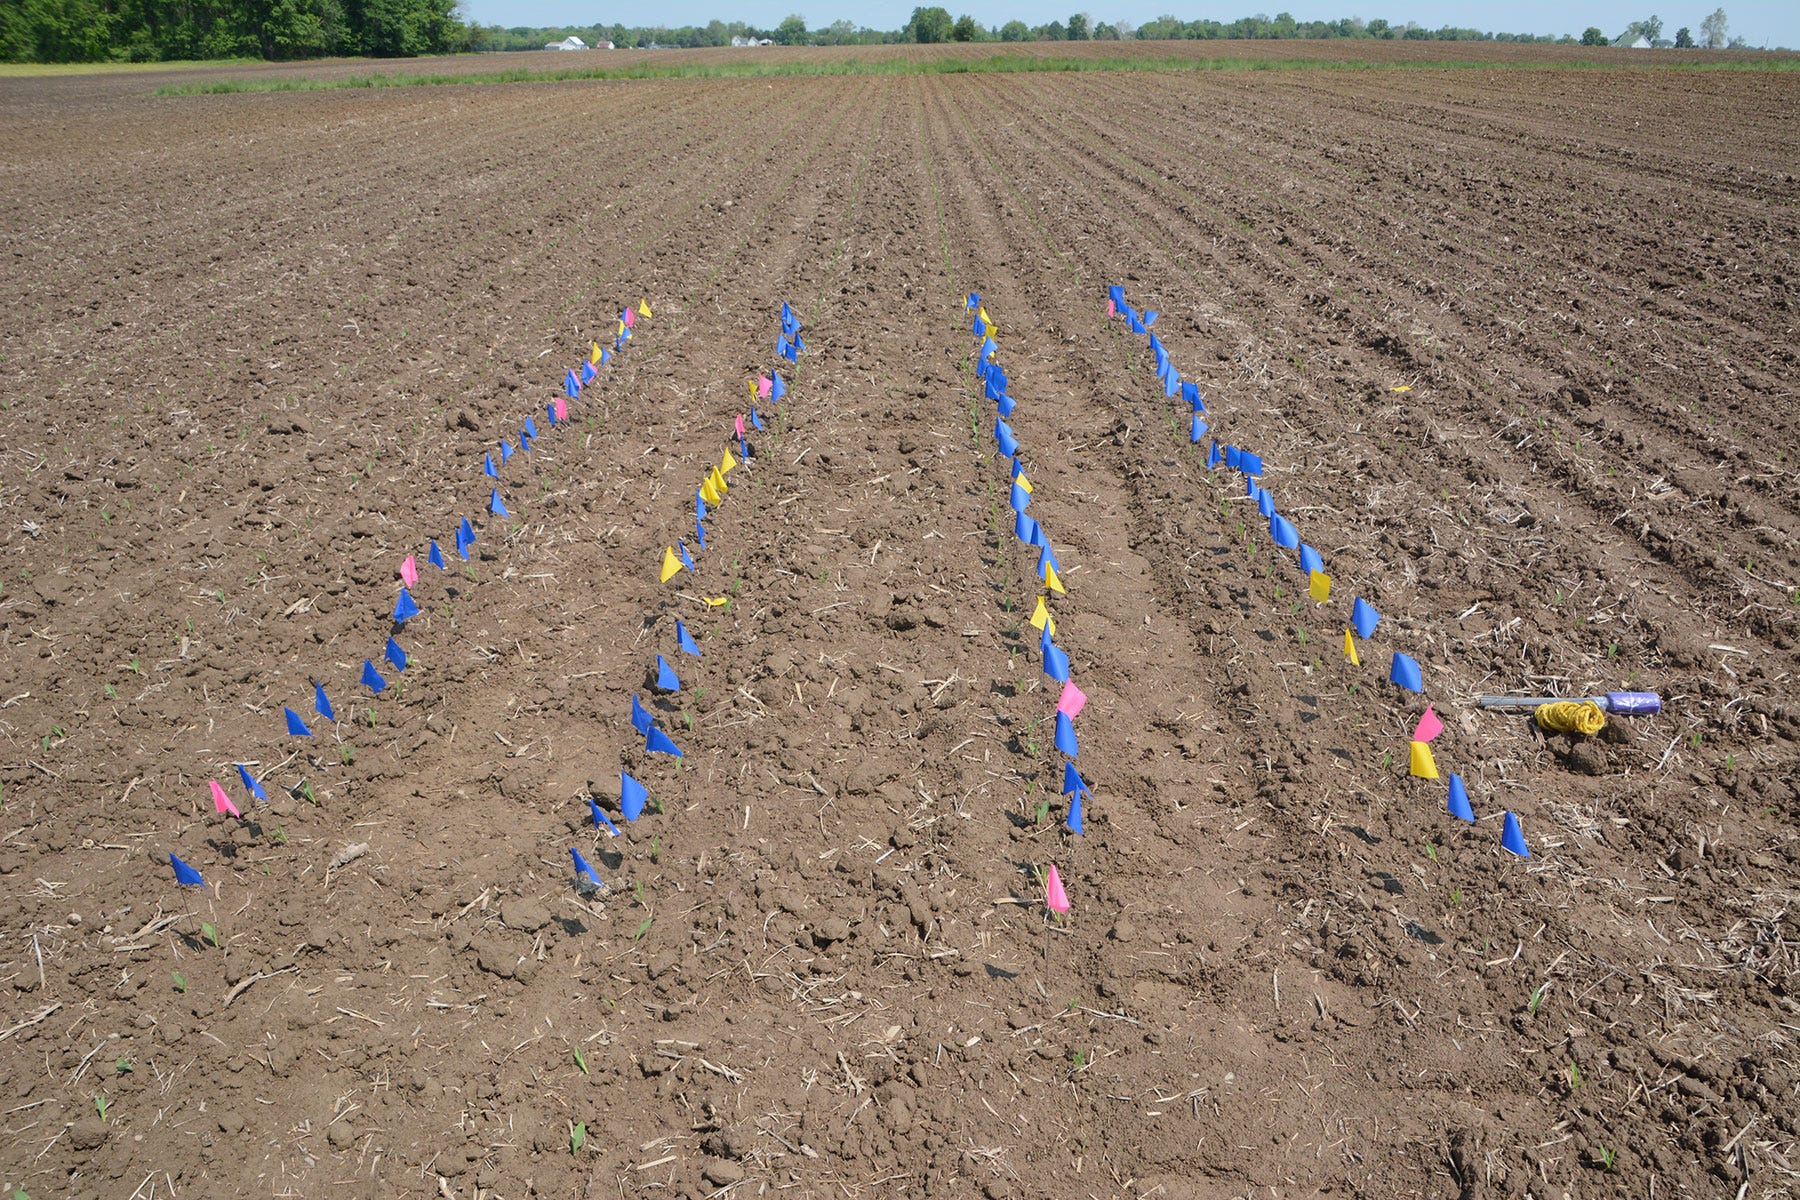 A close up of blue flags in a field